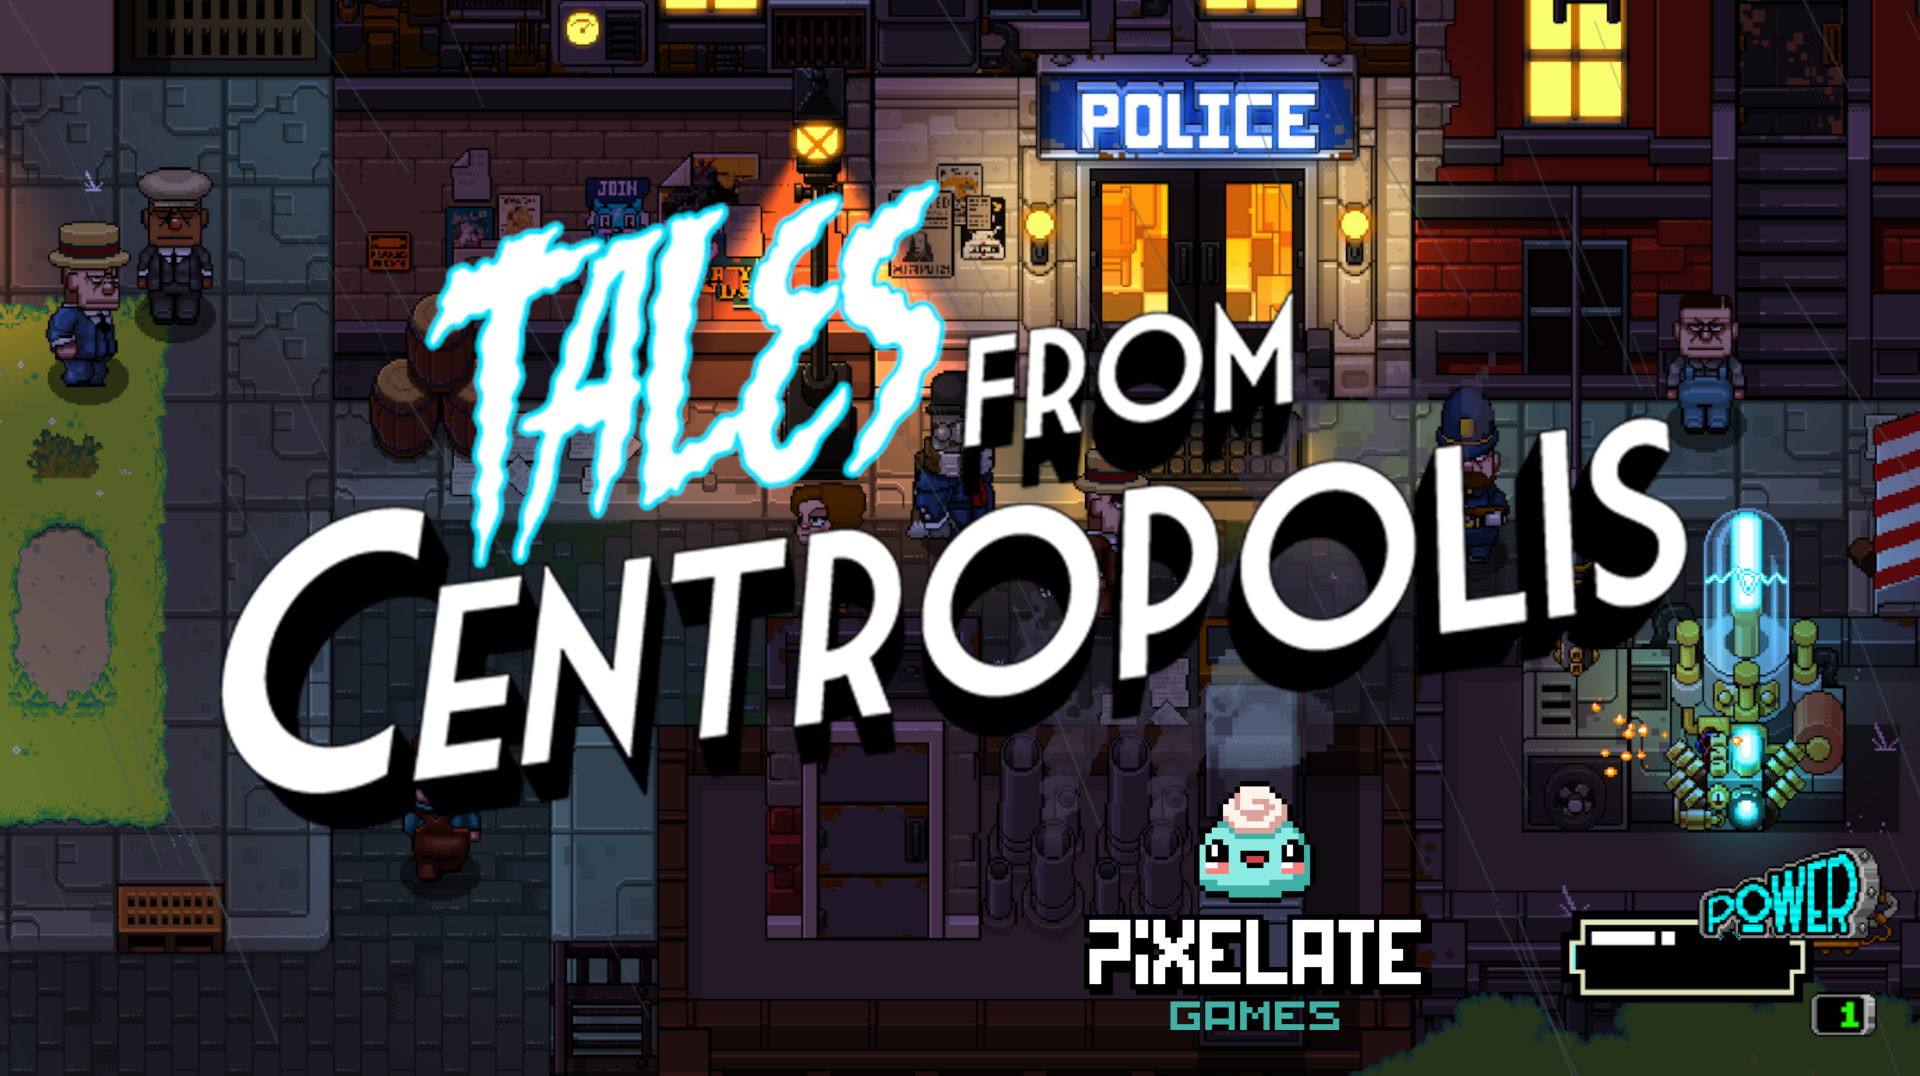 Pixelate Games Interview – Tales from Centropolis